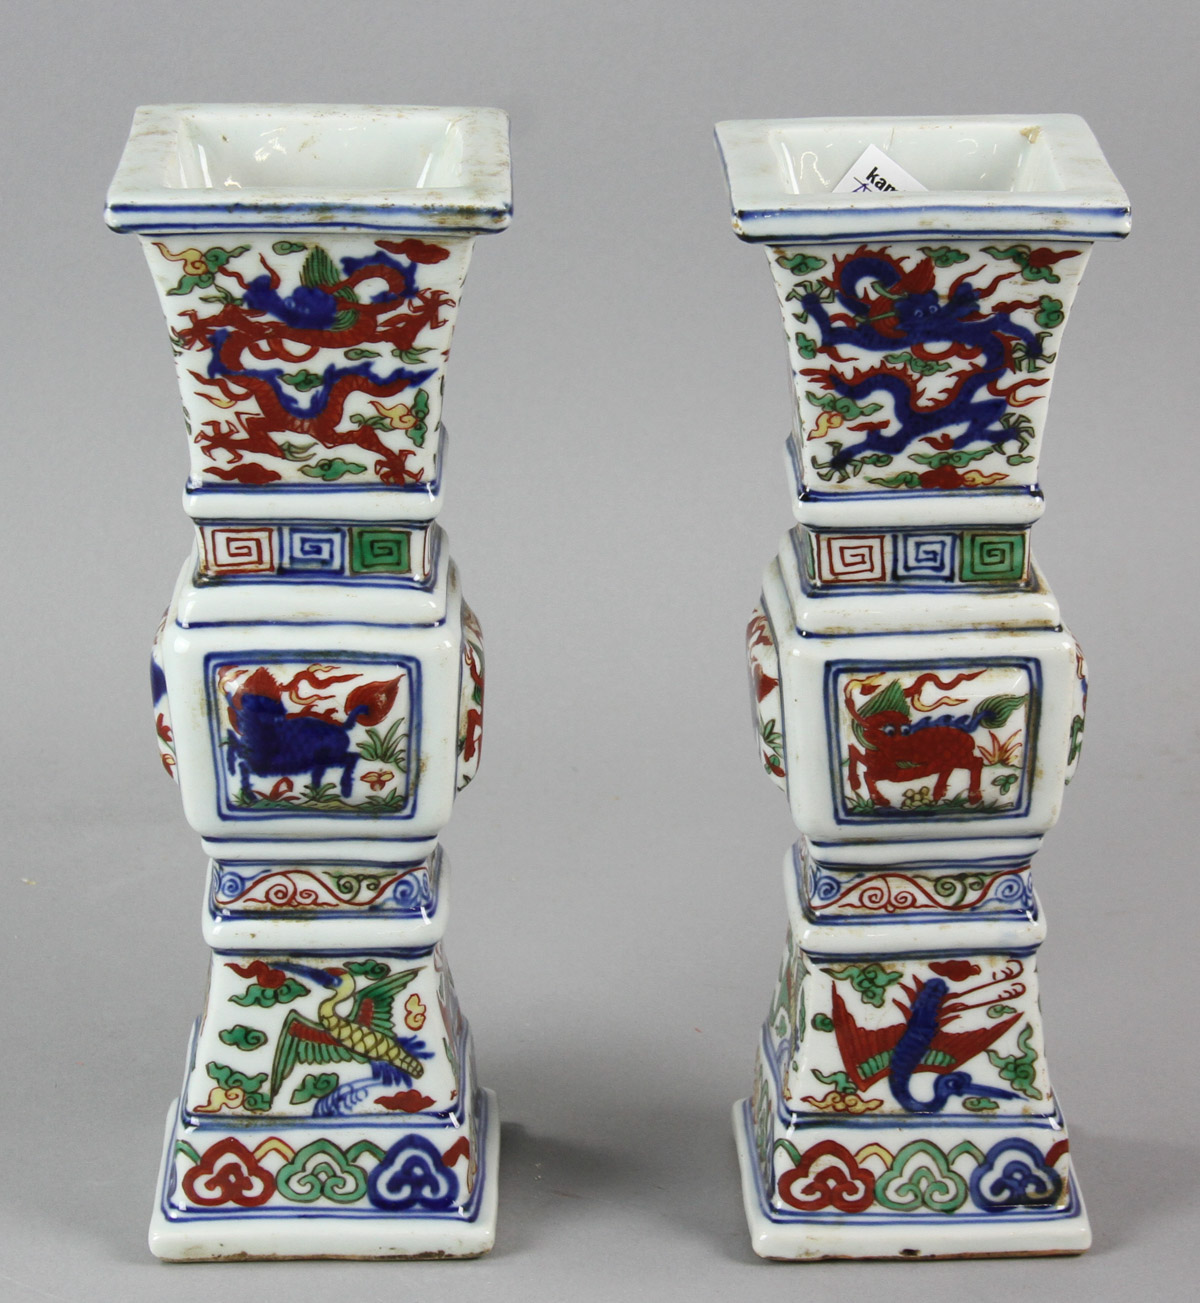 Pair of Chinese Famille Verte square-shaped porcelain vases with marks, 10" H. - Image 3 of 12